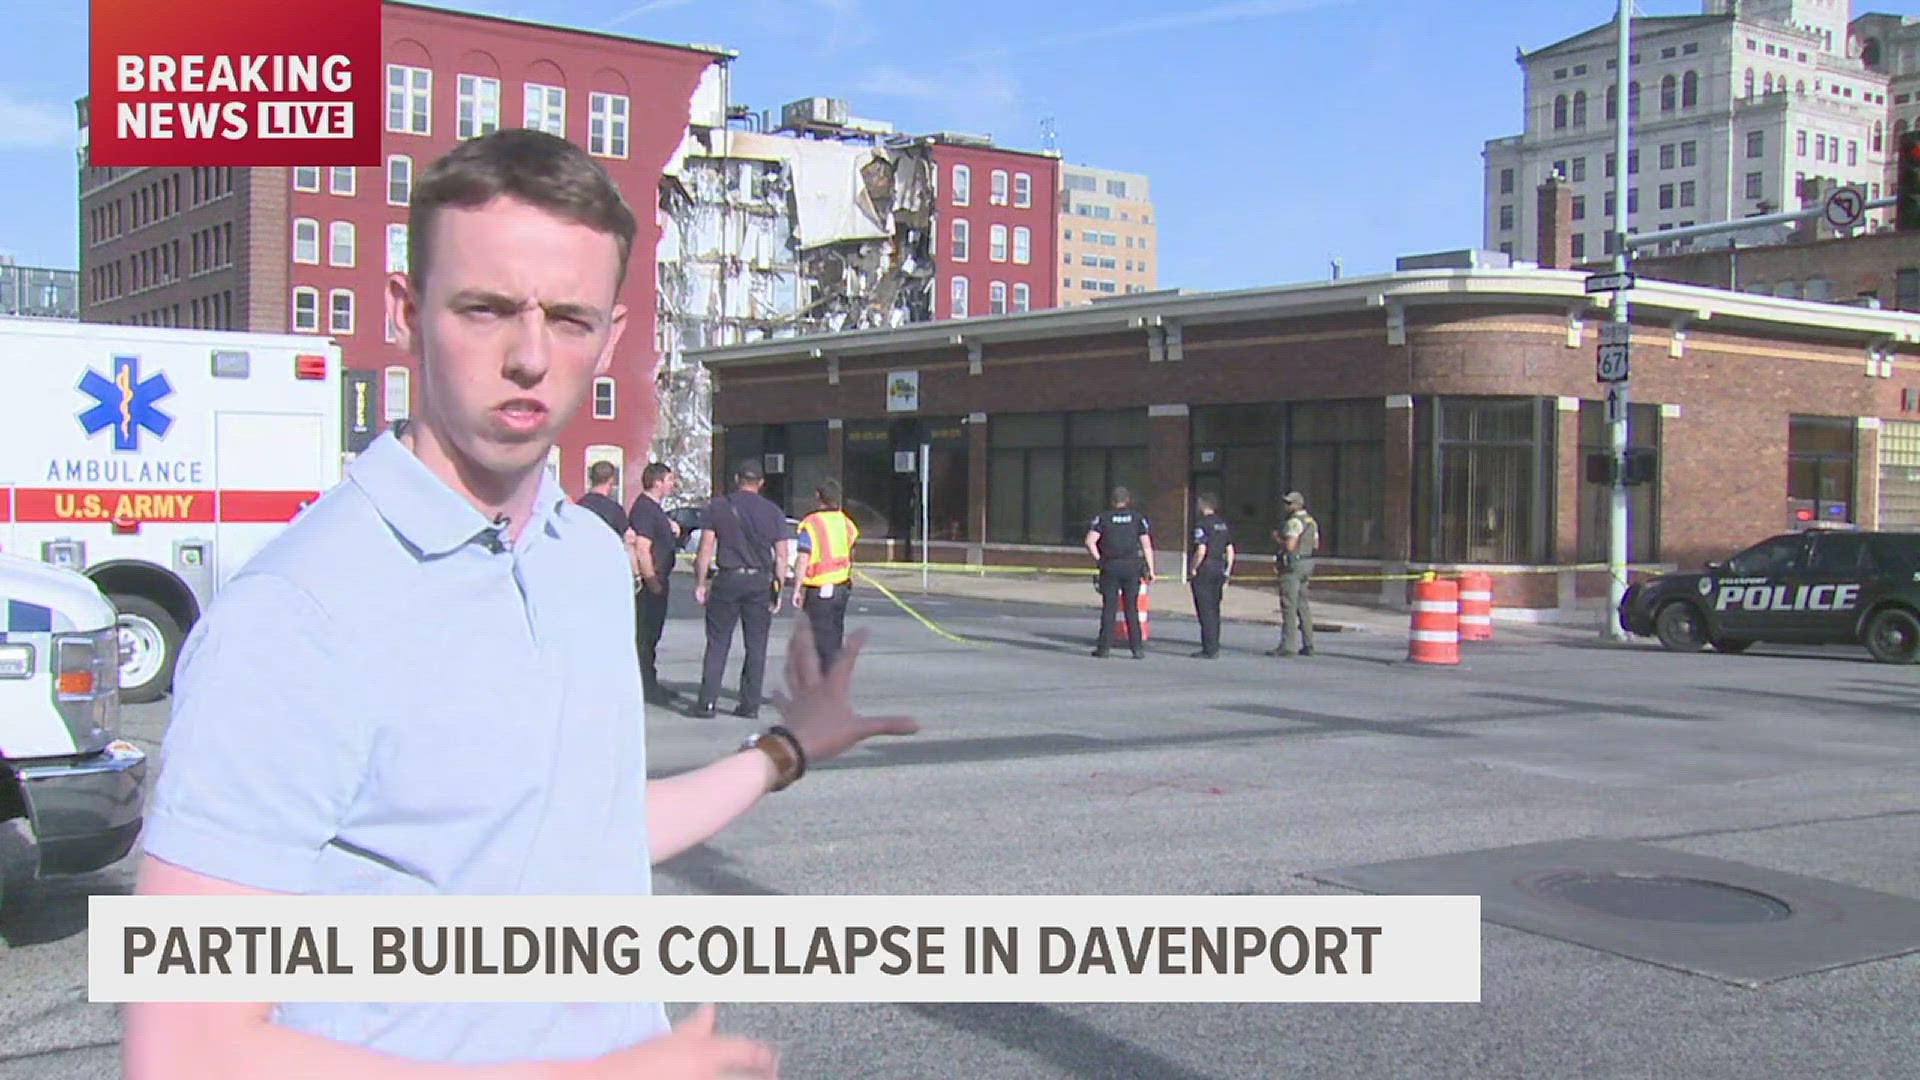 An entire side of the apartment building has collapsed, with at least six stories exposed.